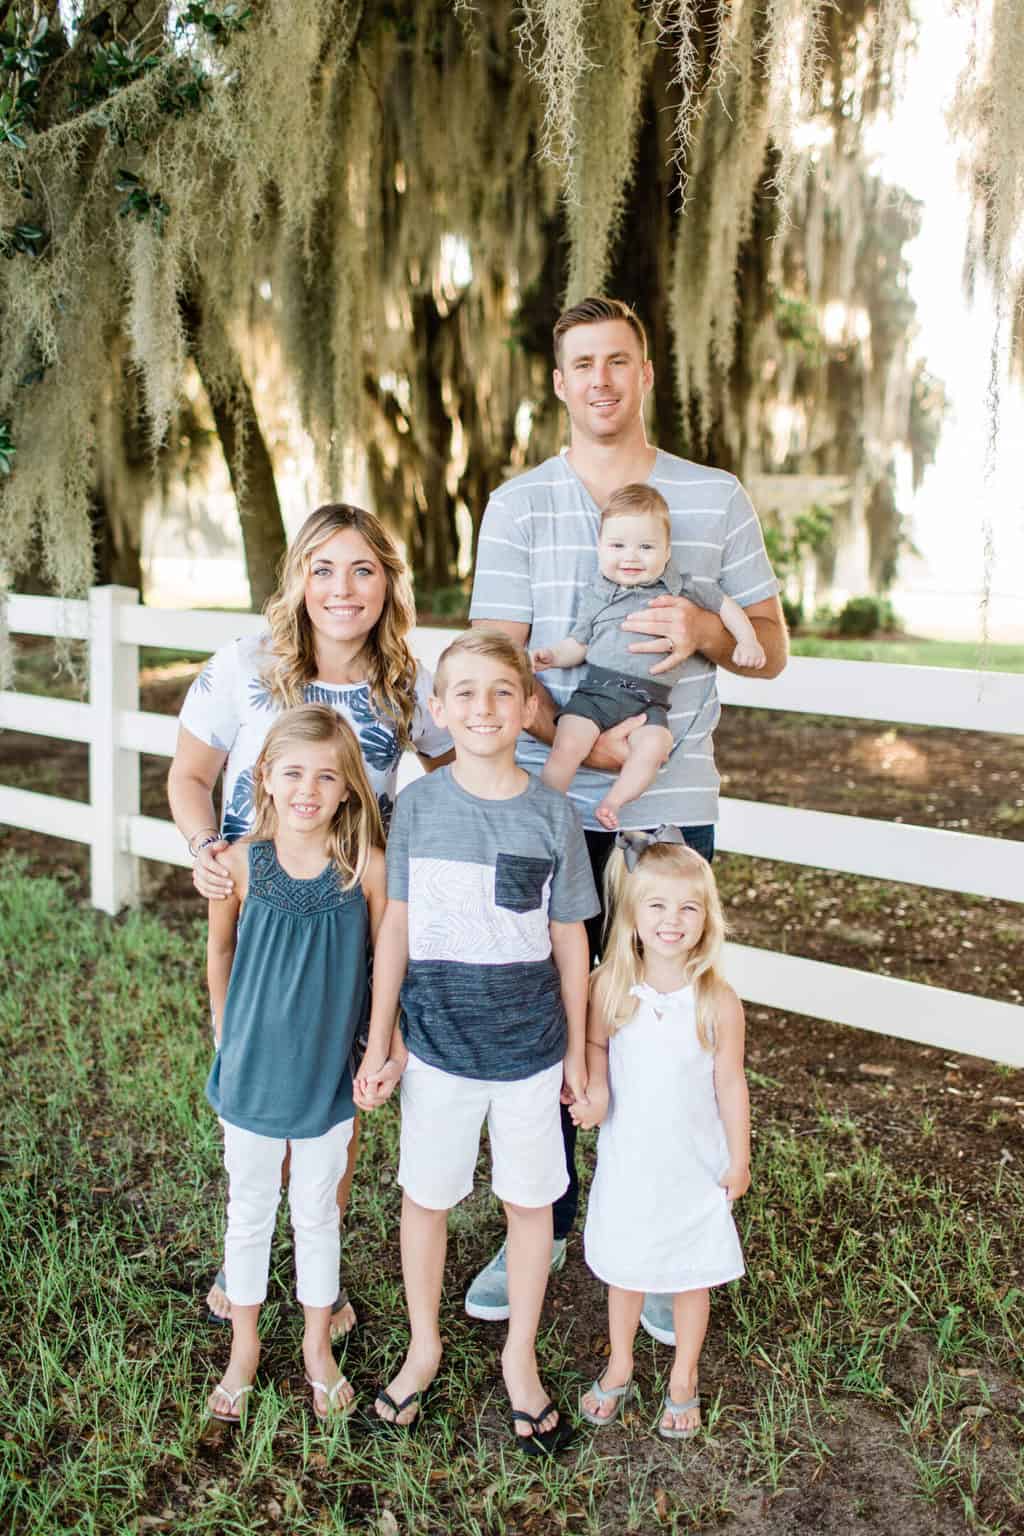 Best Summer Family Photo Ideas for family of 6 - What to Wear and More!